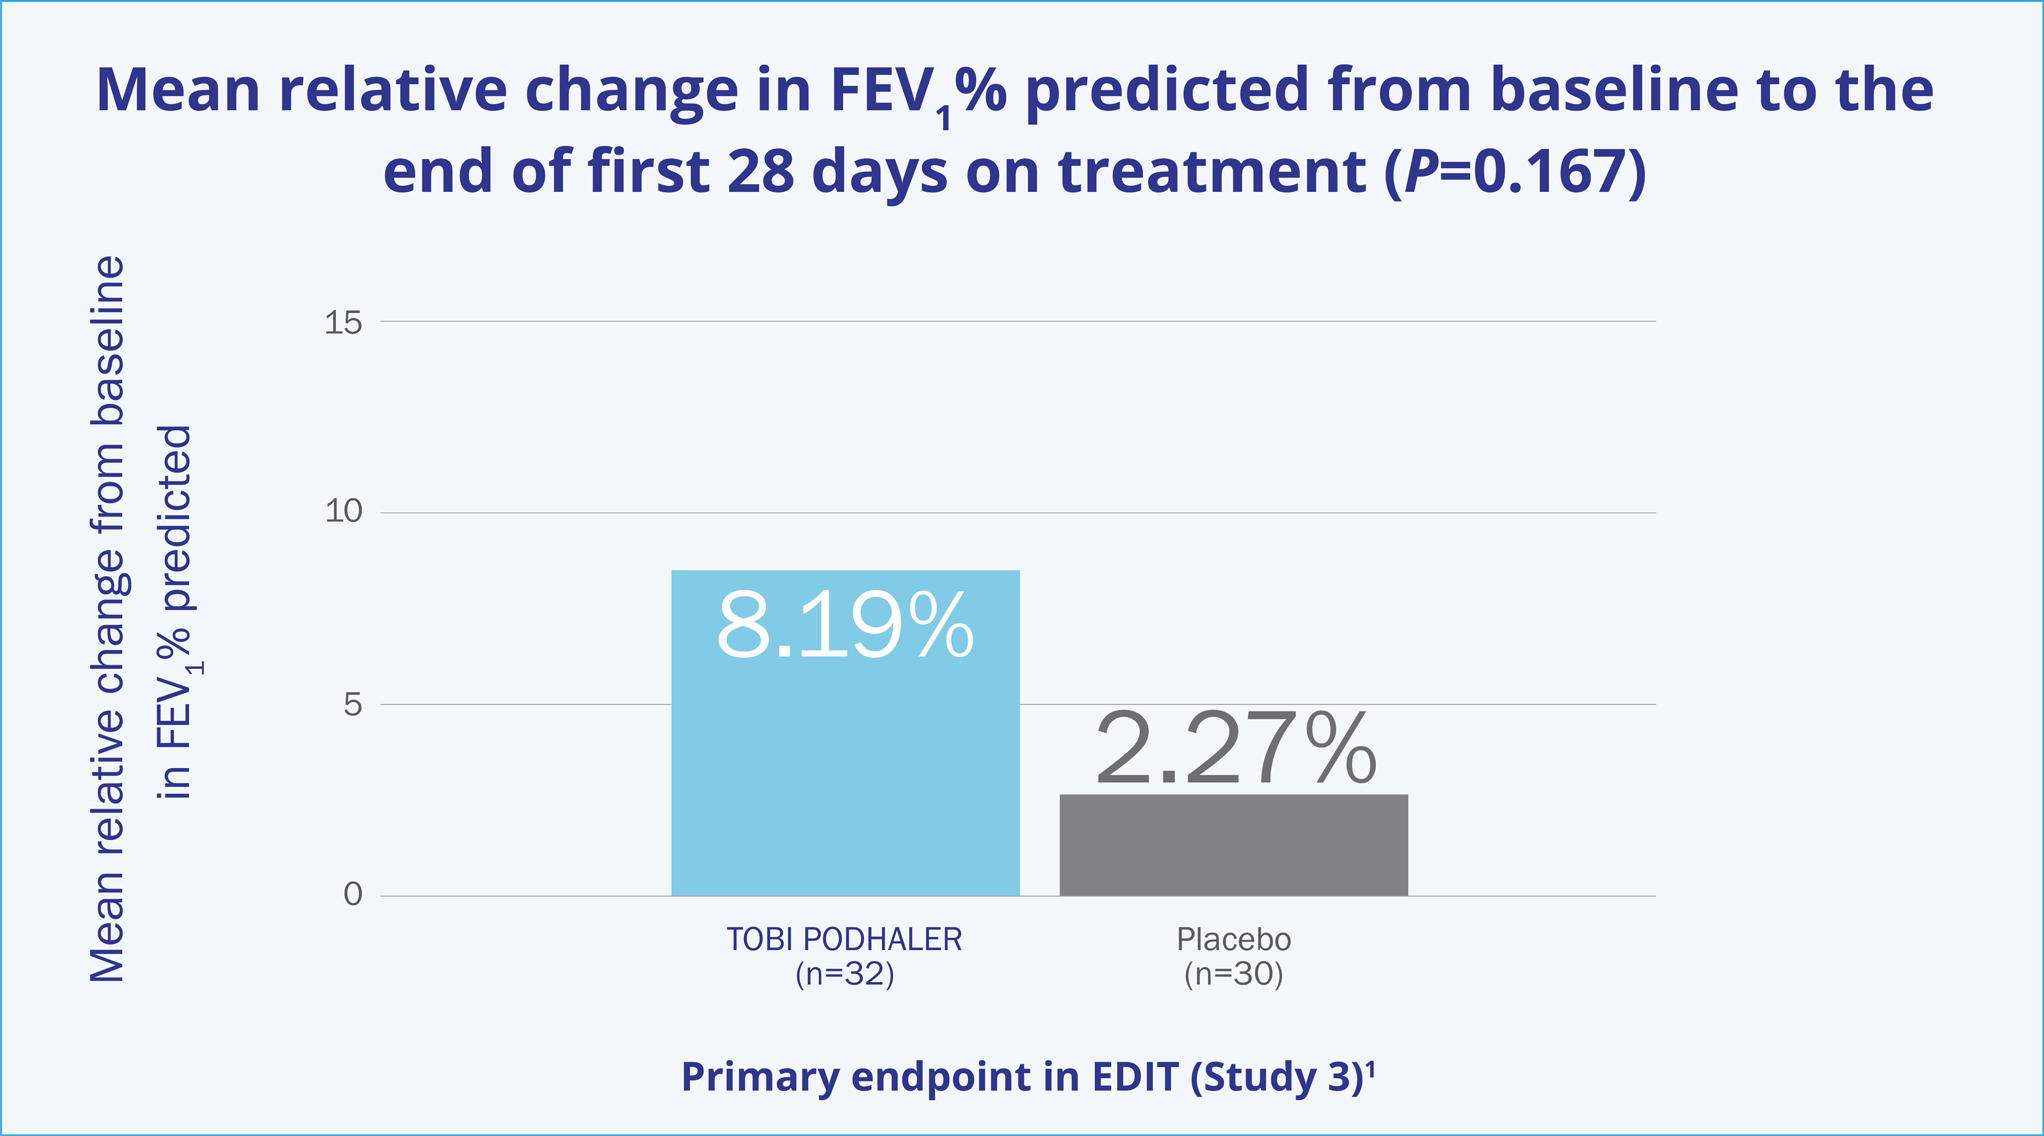 Chart showing mean relative change in FEV versus primary endpoint in EDIT study